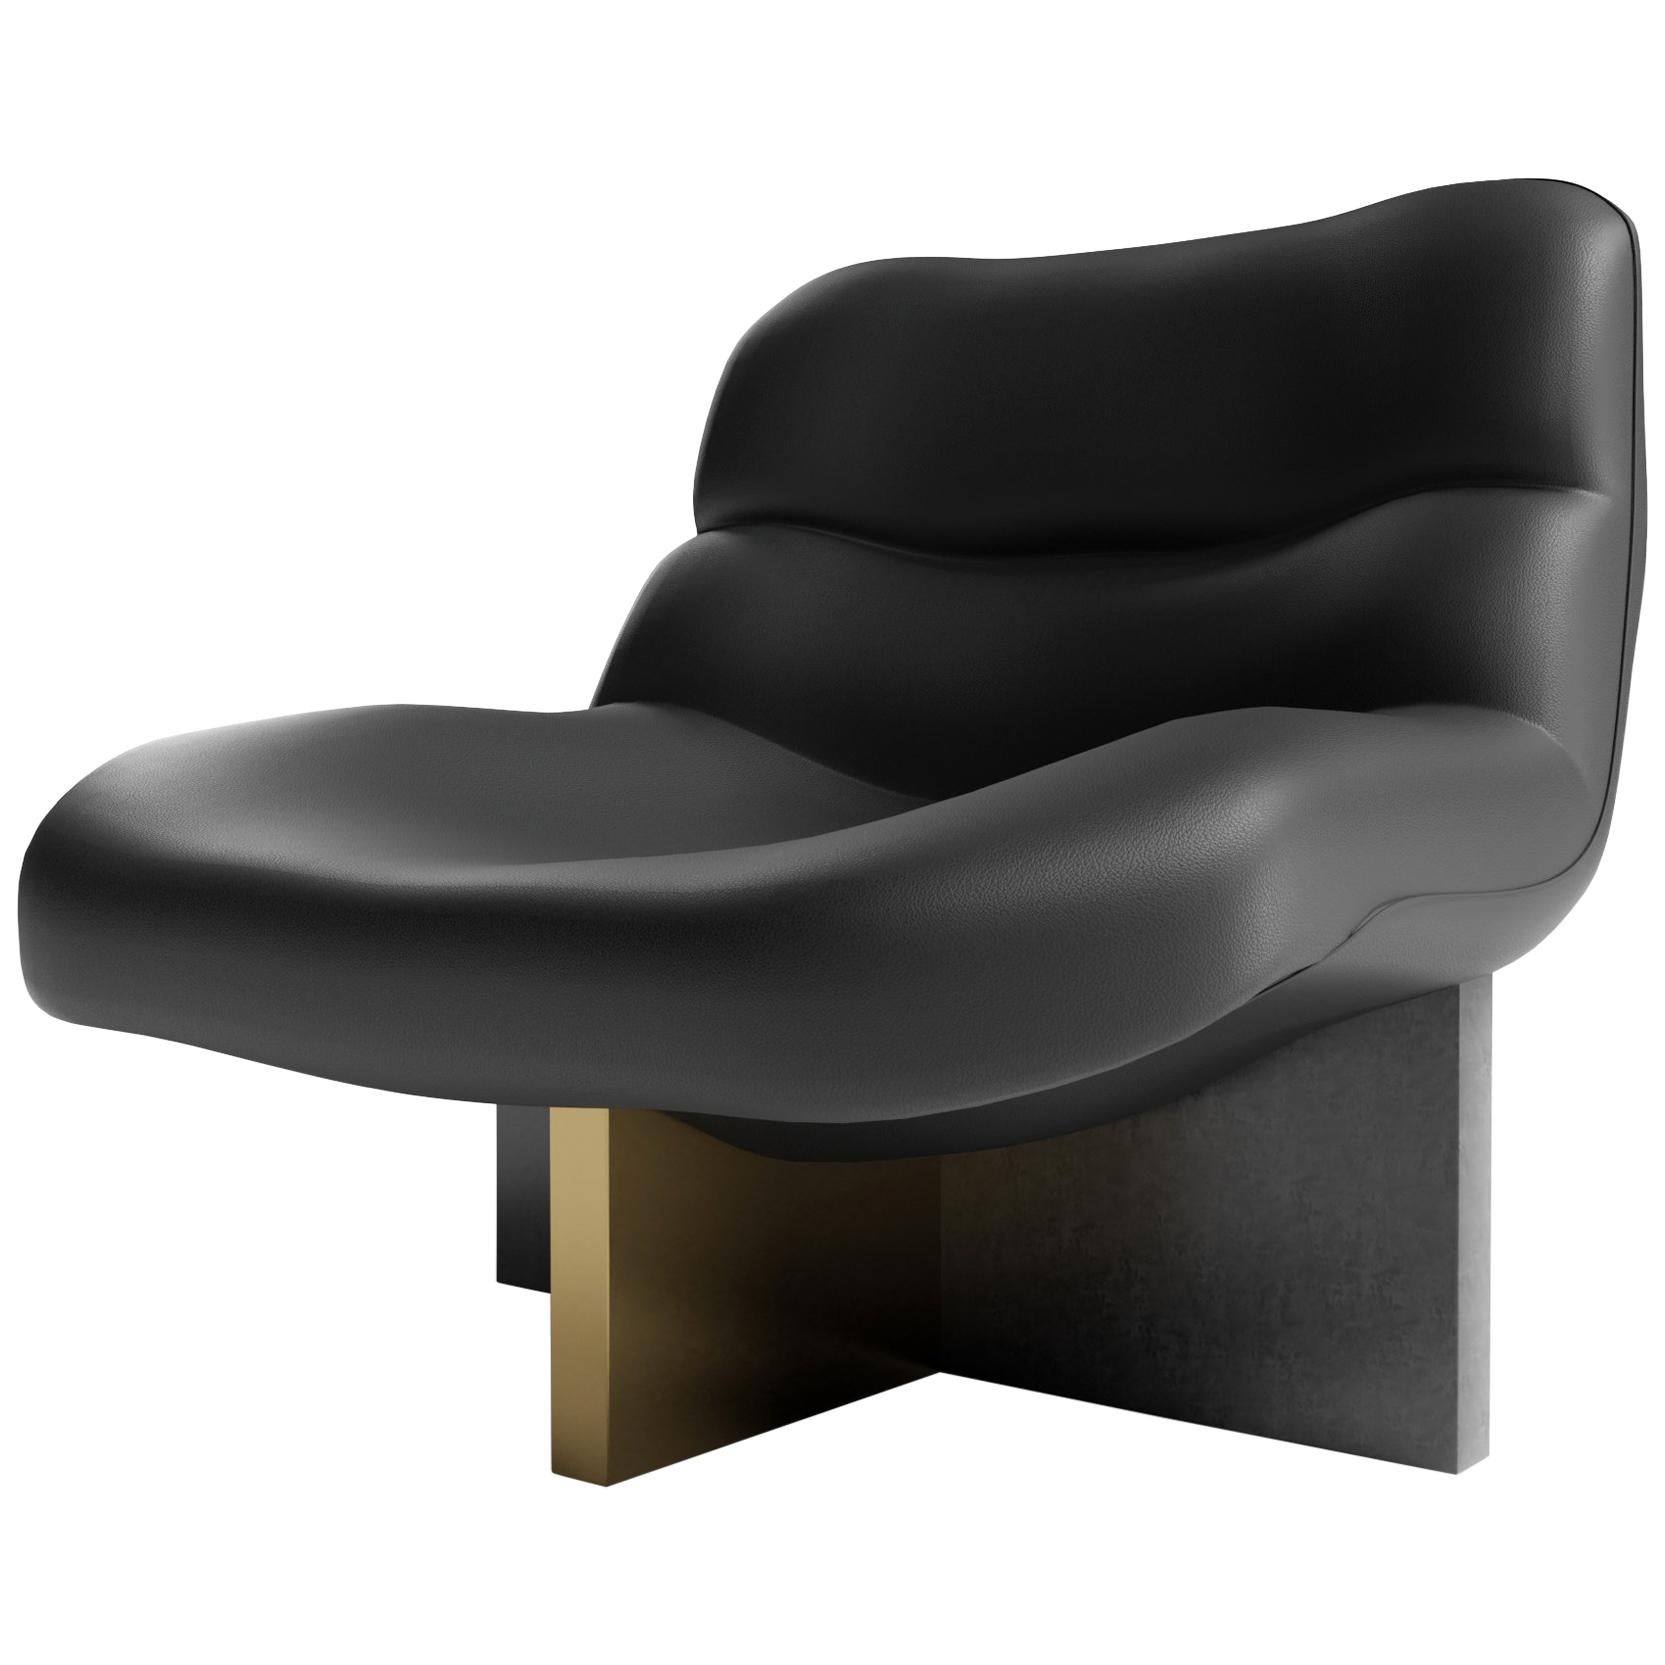 ZUMA LOUNGE - Modern Chair in a Black Lealpell Seta Leather with High Gloss Base